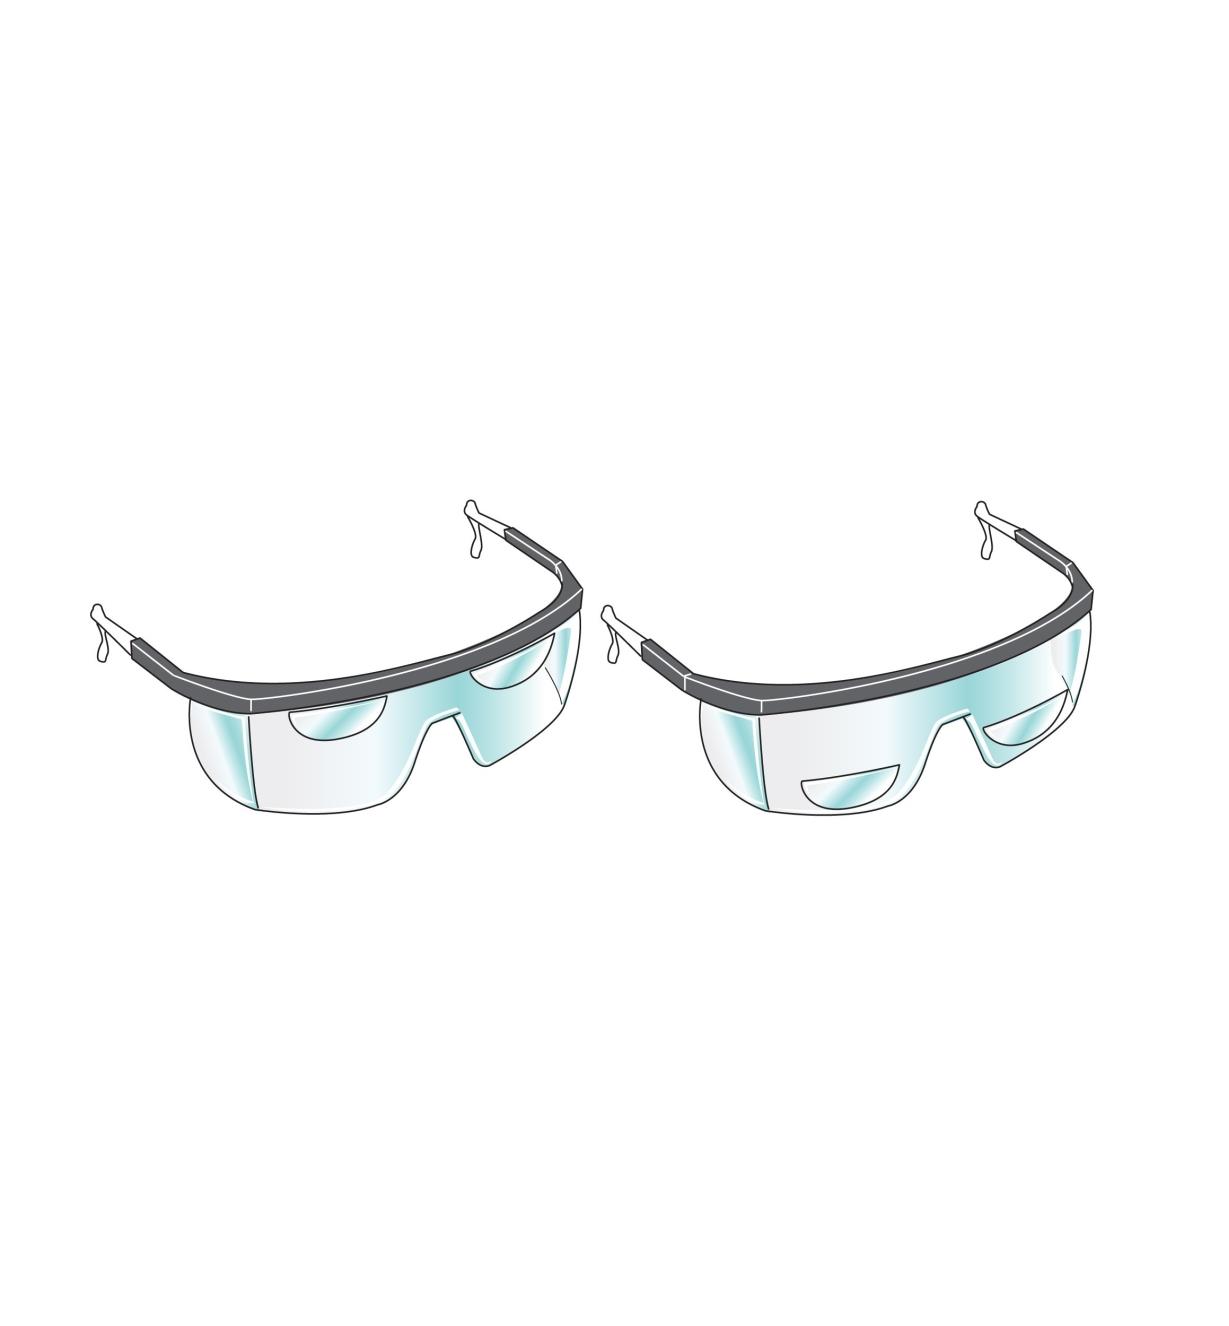 Illustrations show lenses applied to safety glasses in two different positions